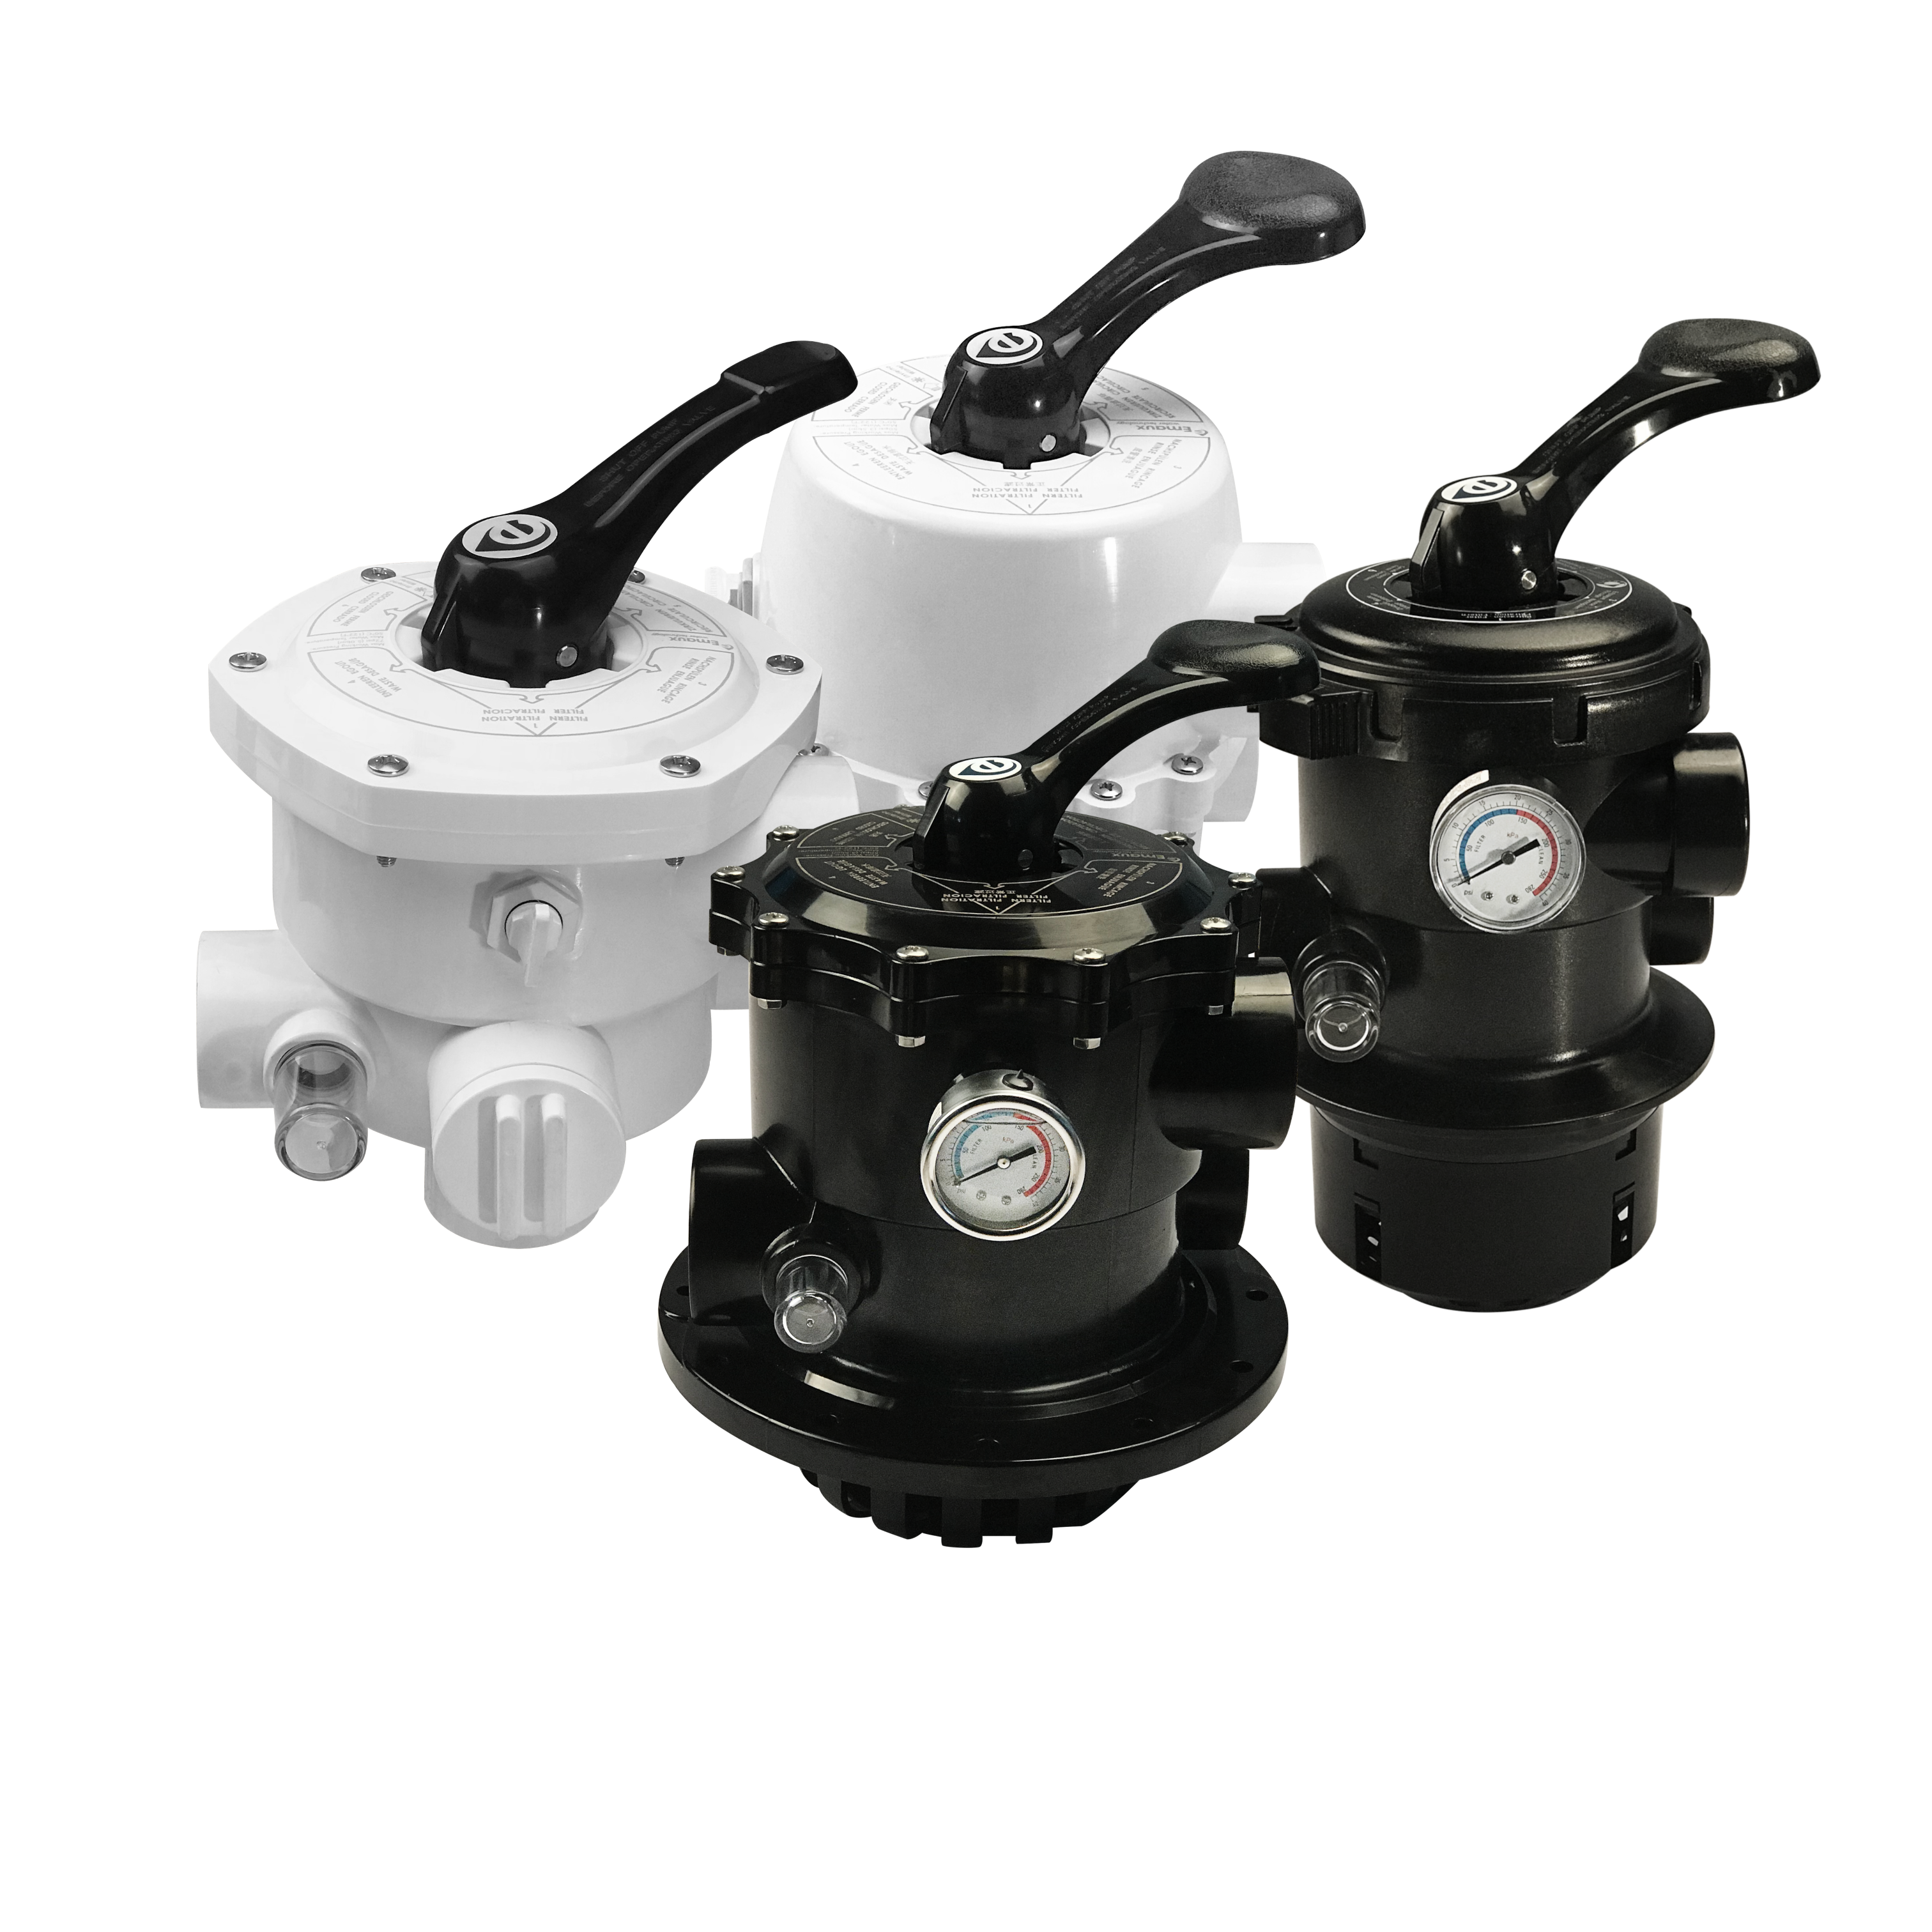 A group of Emaux 6-way multiport valves that includes: white-body side mount valves and black-body top mount valves.